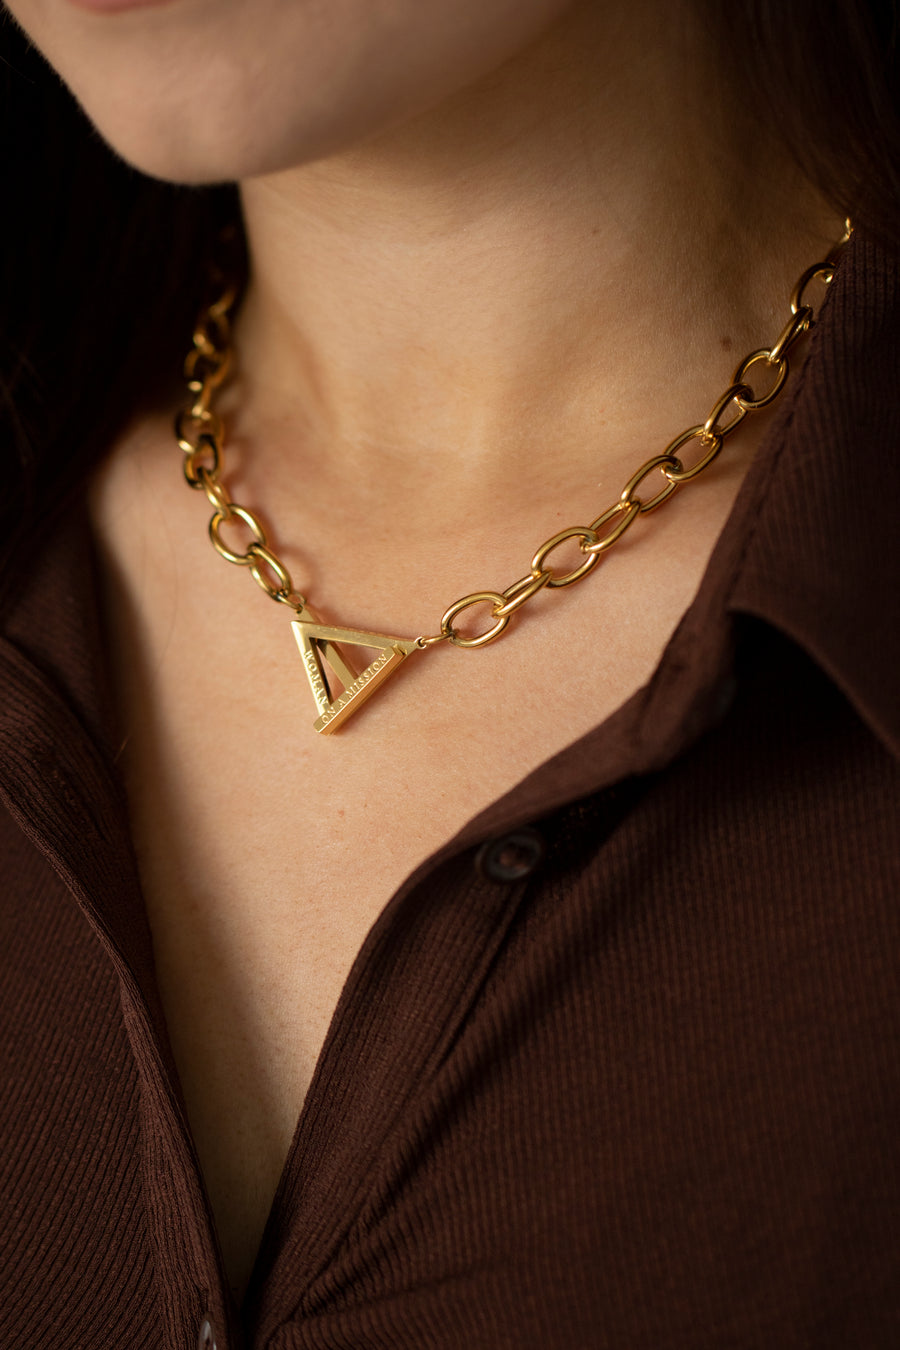 Woman on a Mission Chunky Chain Necklace Gold